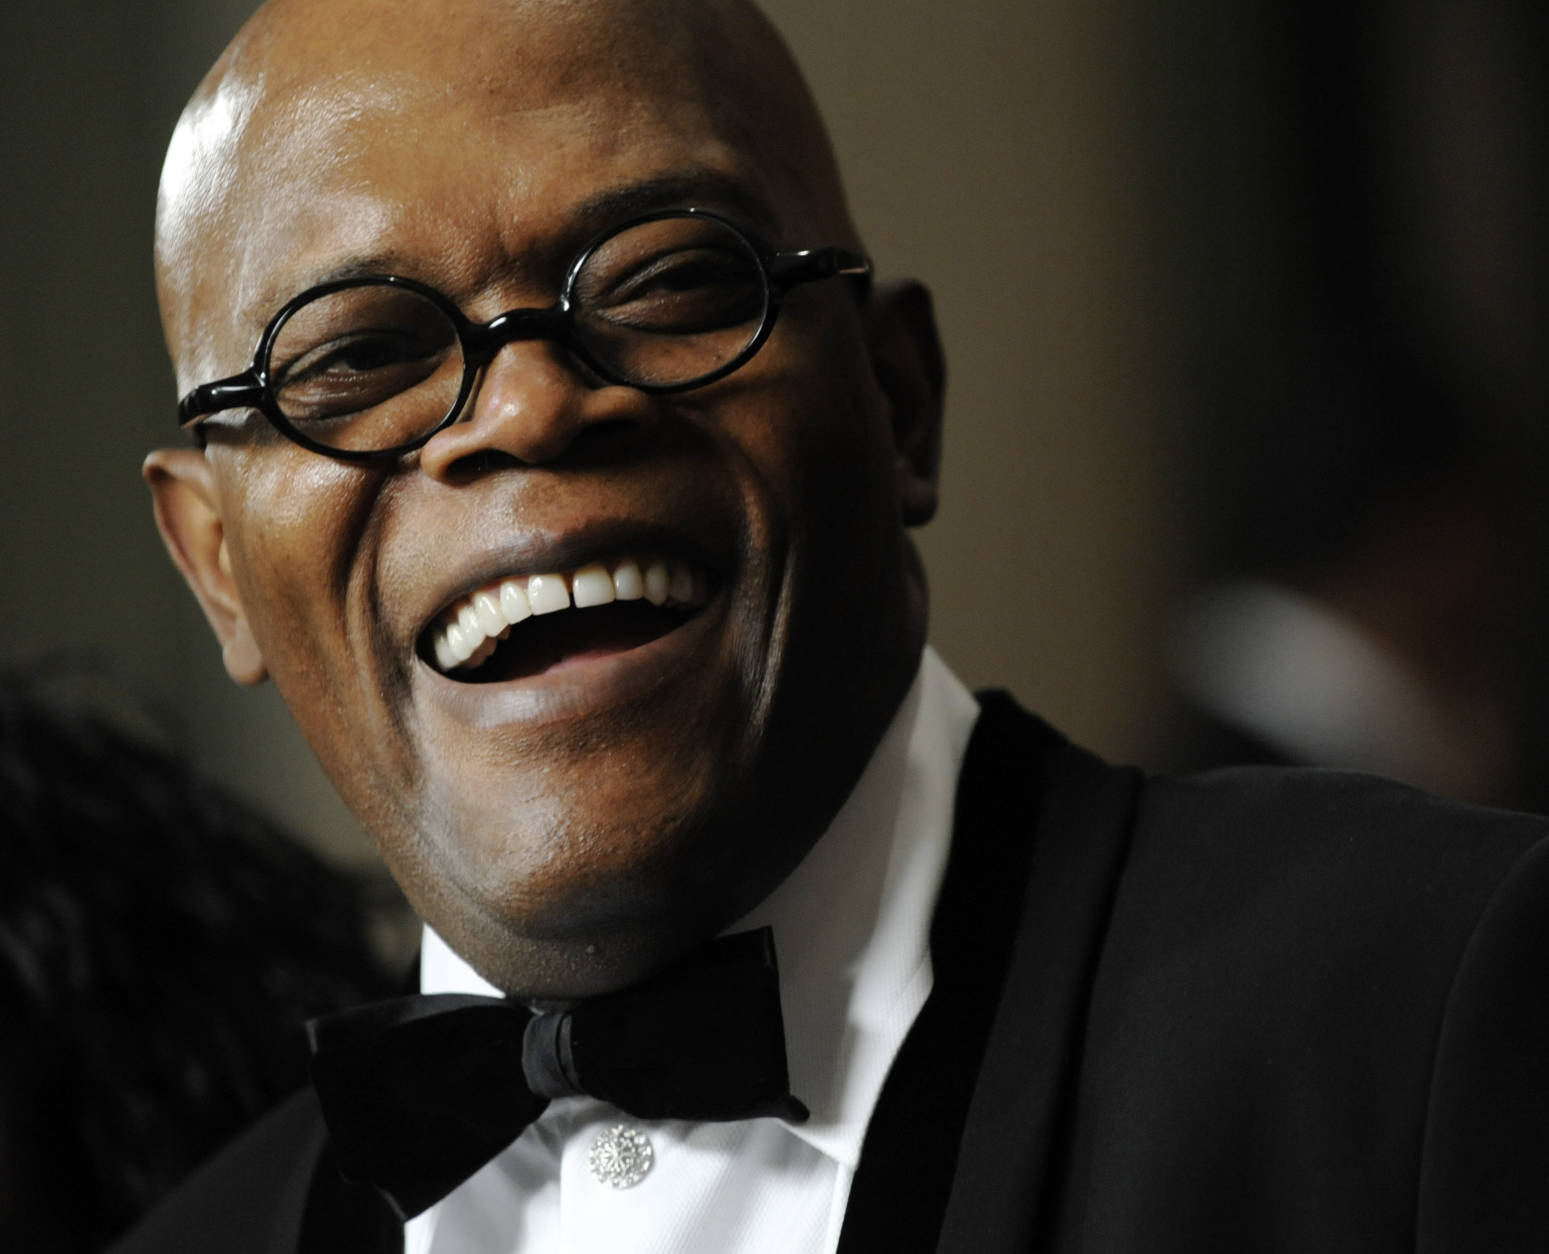 Actor Samuel L. Jackson arrives at the 23rd American Cinematheque Award benefit gala honoring him in Beverly Hills, Calif., Monday, Dec. 1, 2008. (AP Photo/Chris Pizzello)